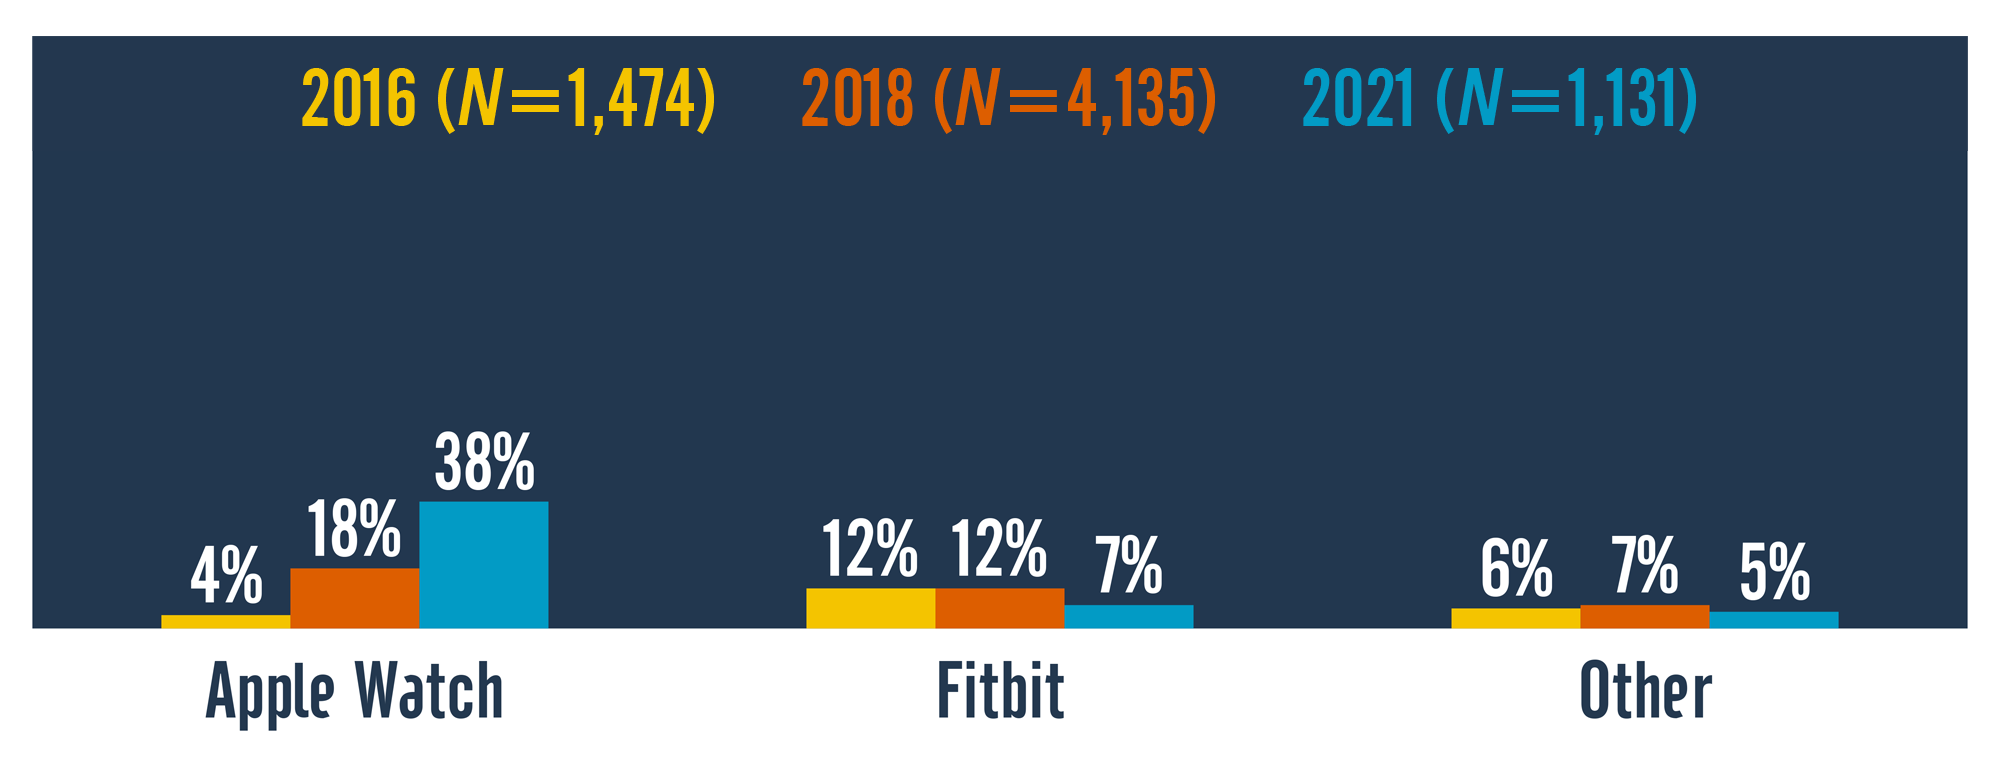 Column chart comparing ownership of wearable devices across three survey years (2016, 2018, and 2021). Ownership of Apple Watches in those three years was 4%, 18%, and 38%. Ownership of Fitbit devices was 12%, 12%, and 7%. Ownership of other wearables was 6%, 7%, and 5%.